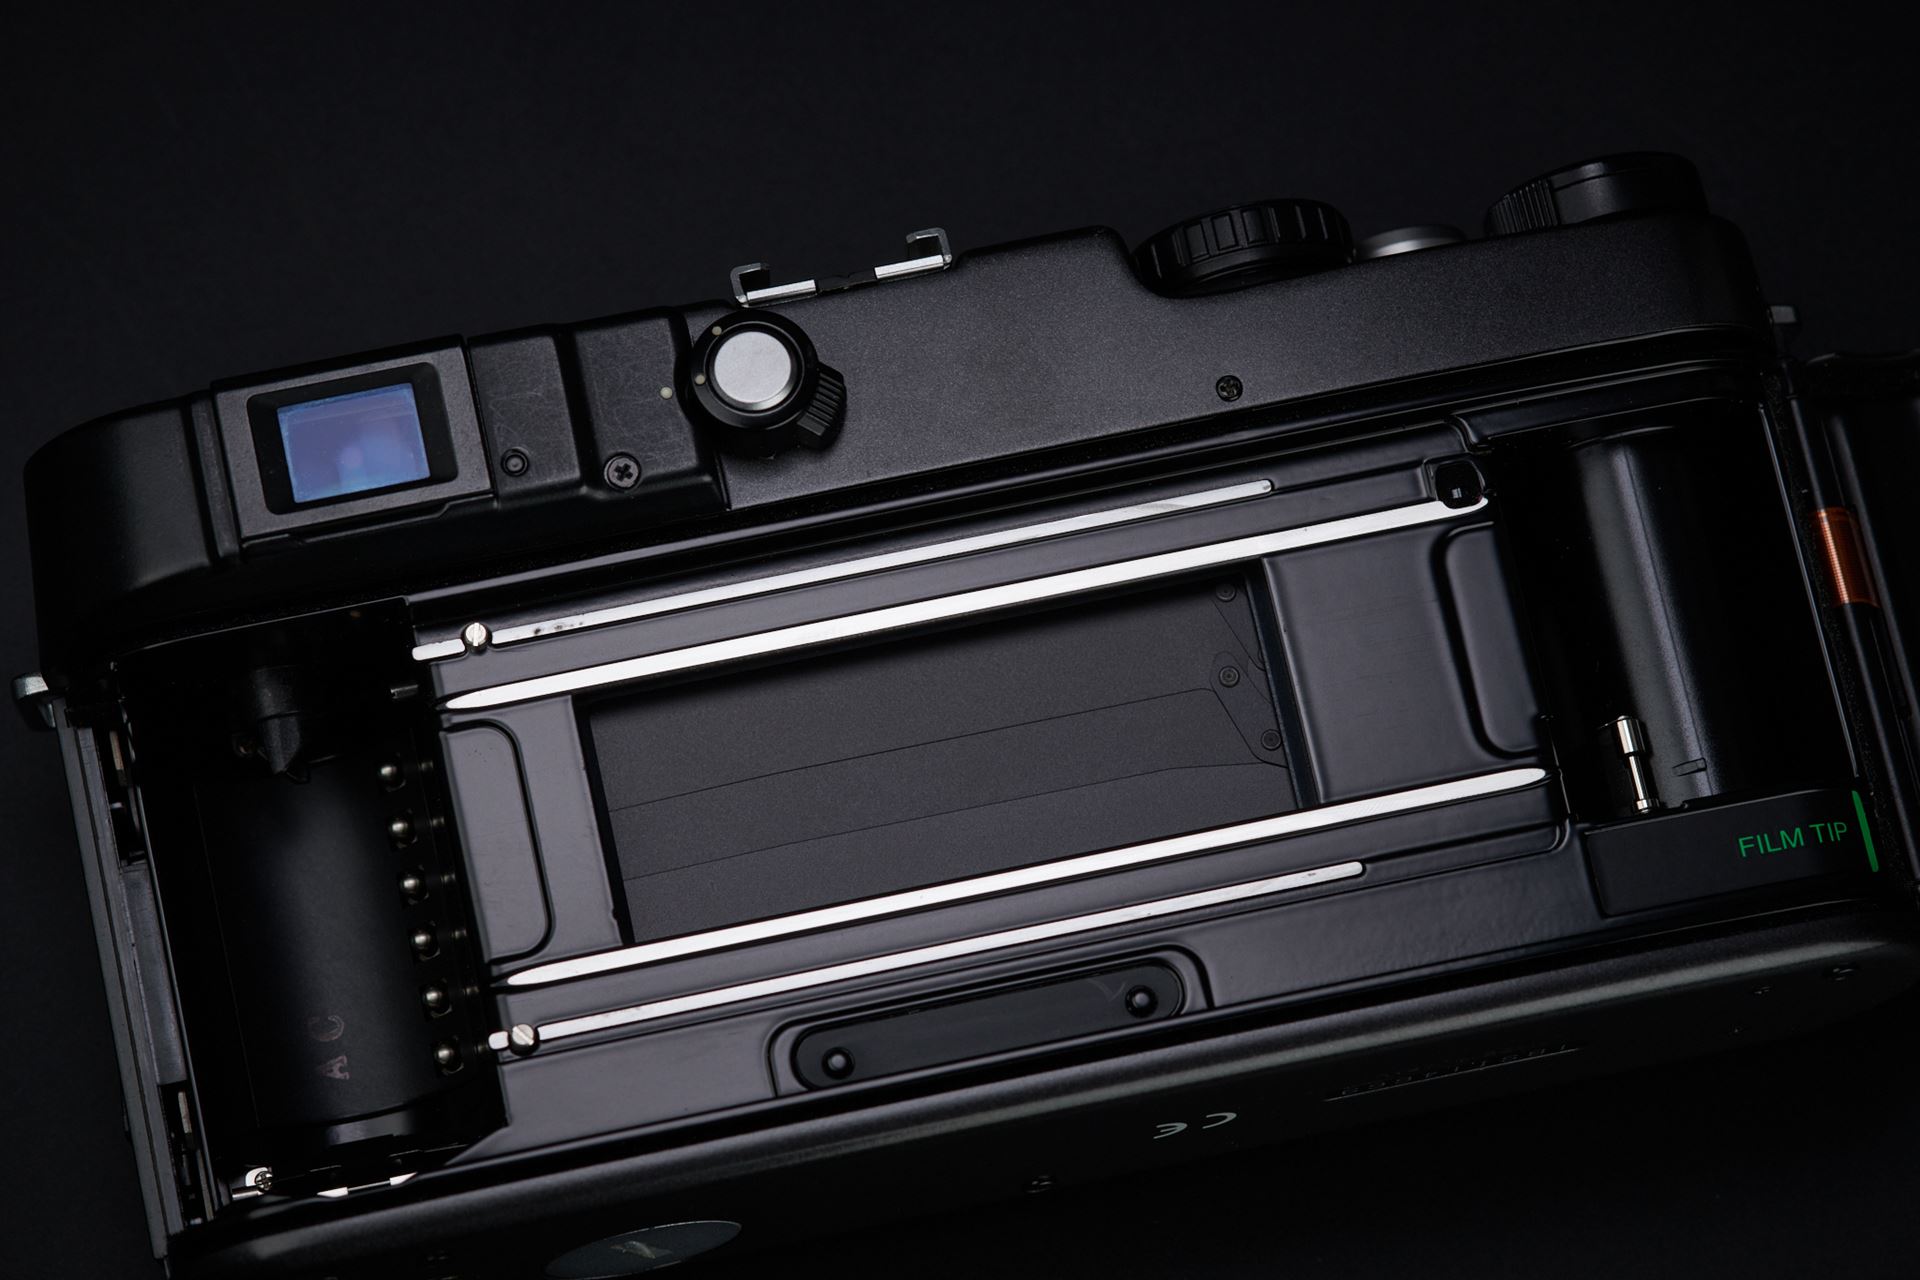 Picture of hasselblad xpan II w/ hasselblad 45mm f/4